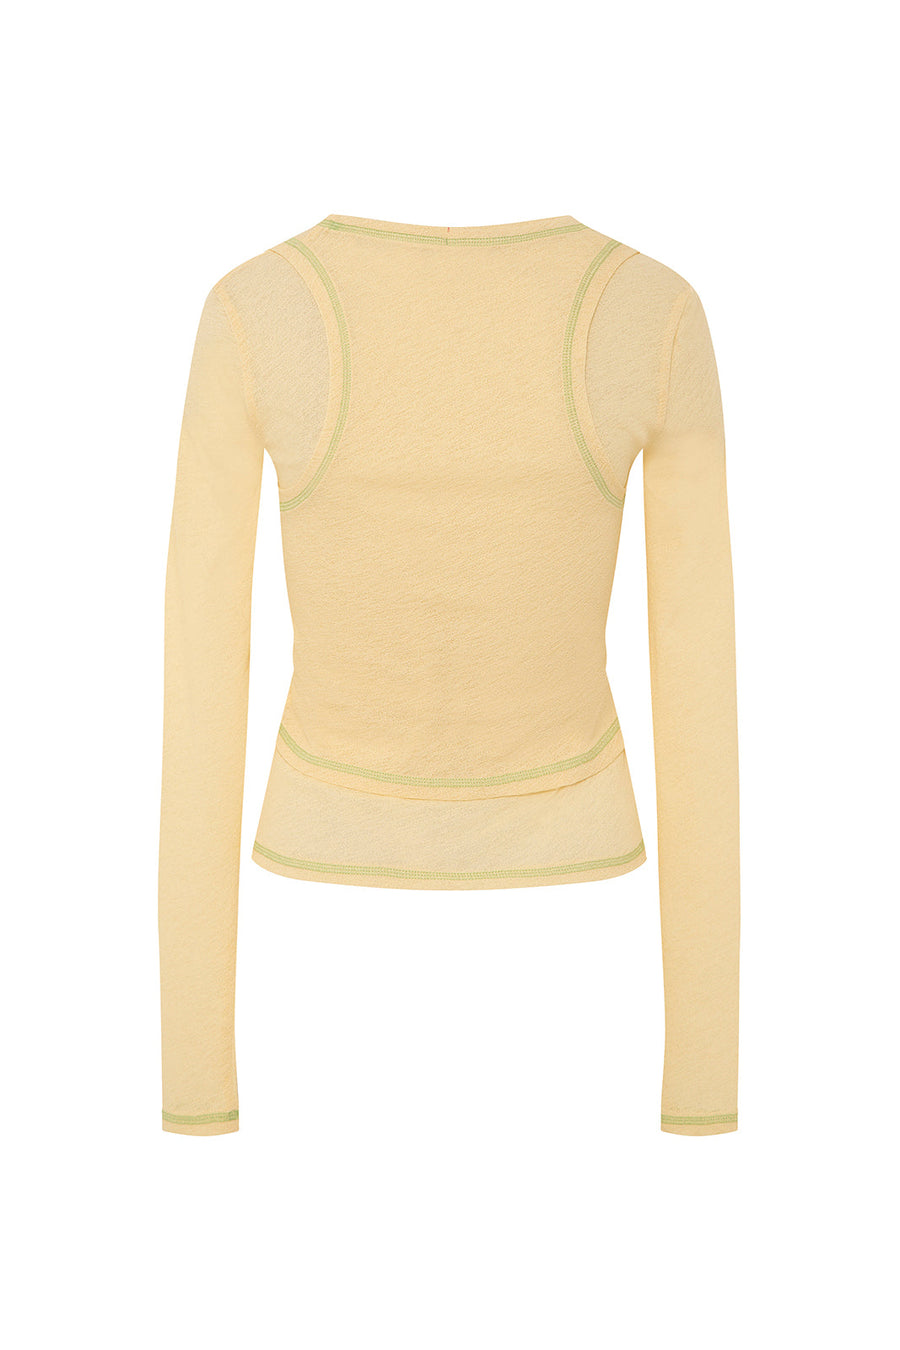 KIARA - Layered long sleeve top with contrast stitches